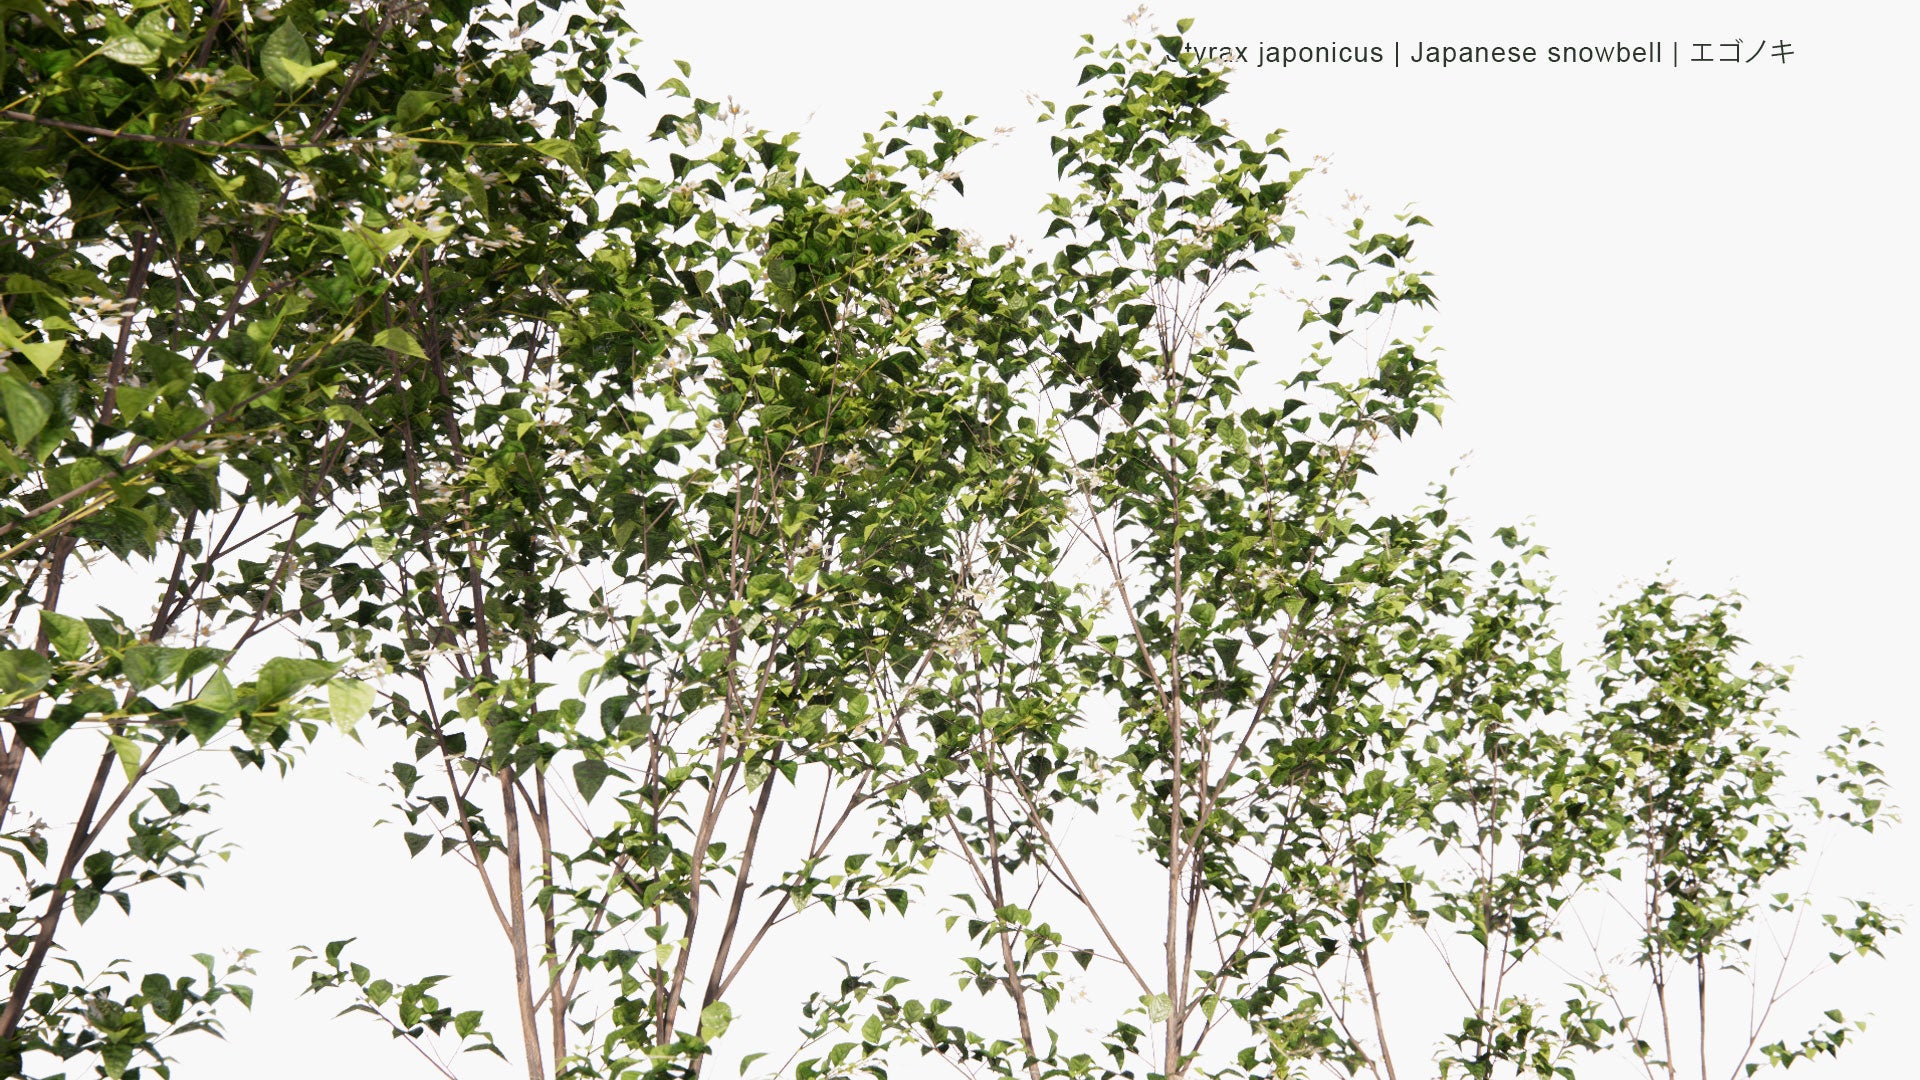 Low Poly Styrax Japonicus - Japanese Snowbell, エゴノキ (3D Model)